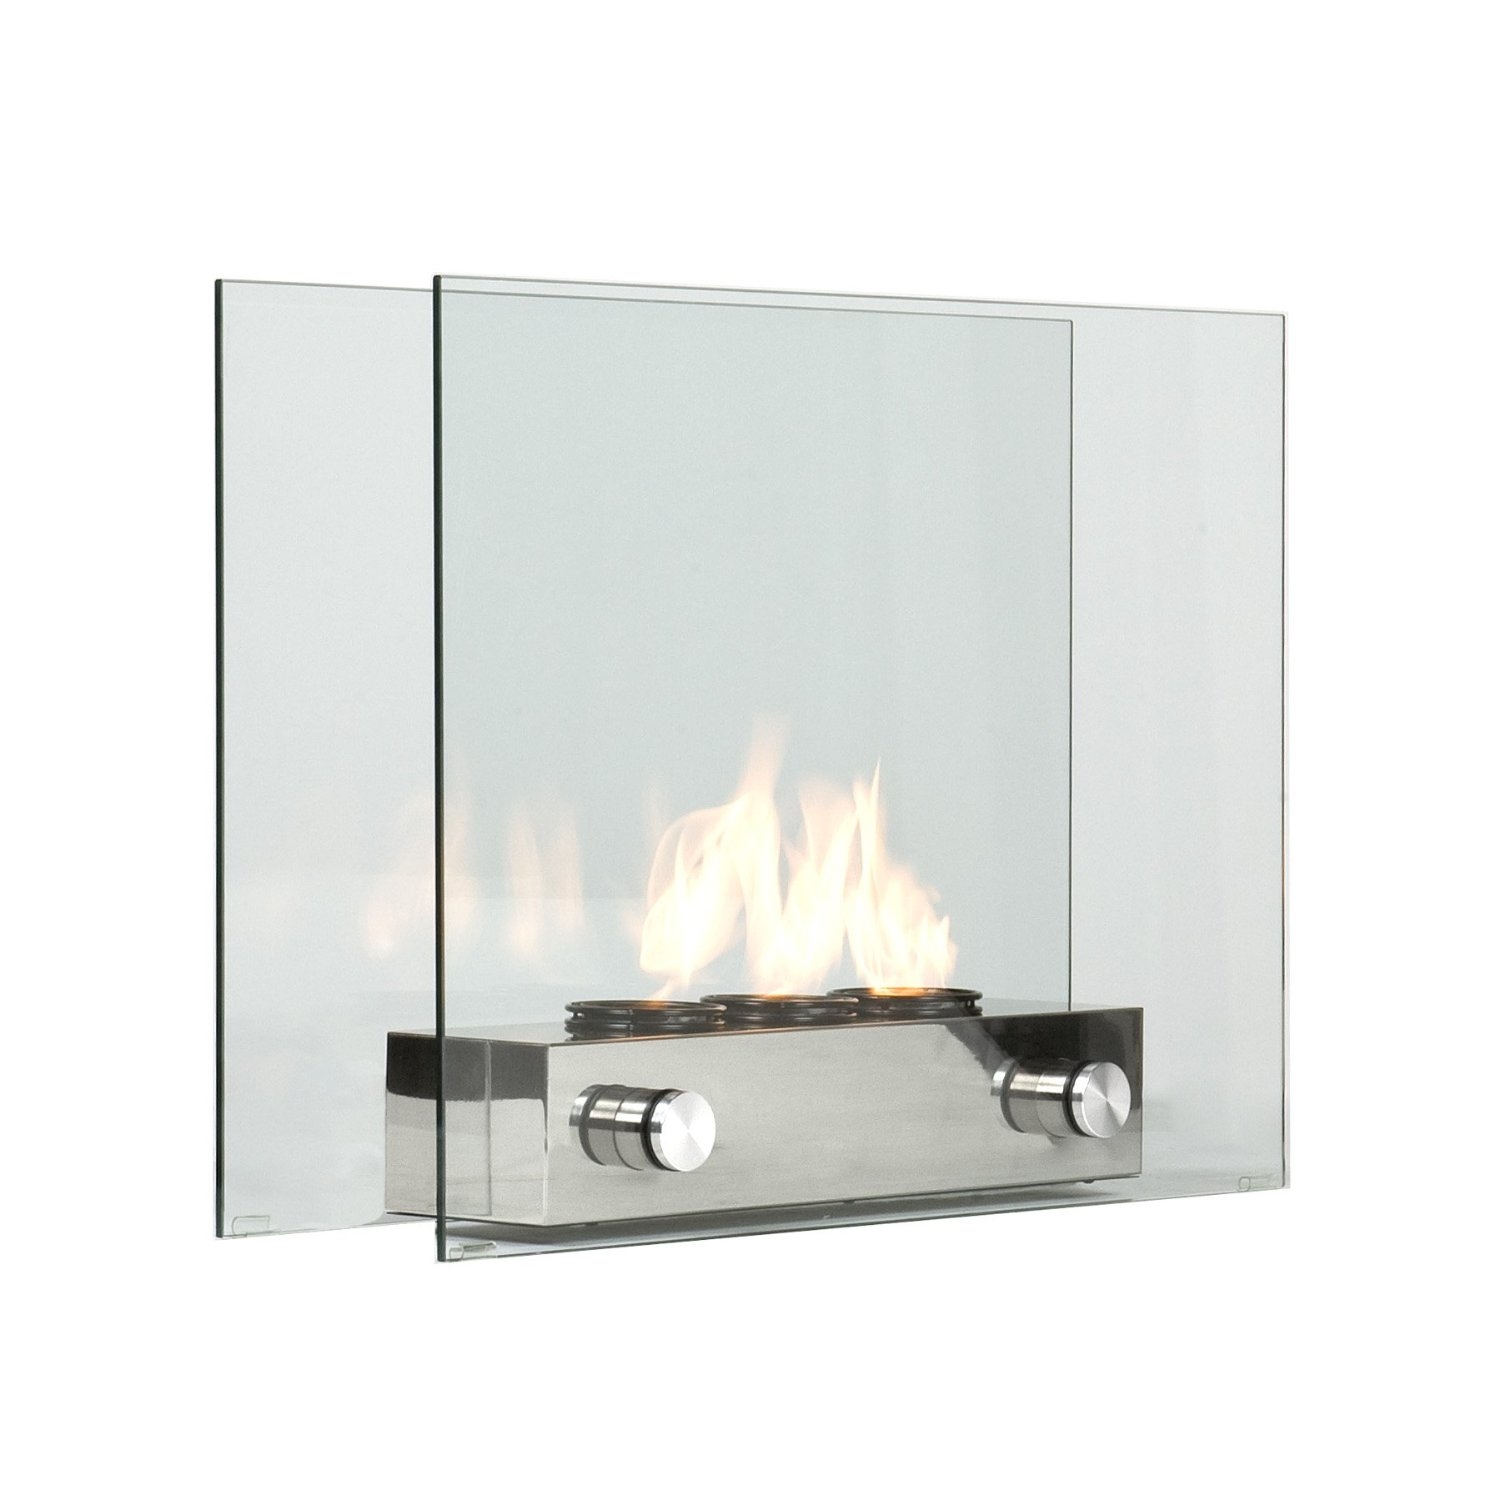 This portable gel fireplace can warm up any room